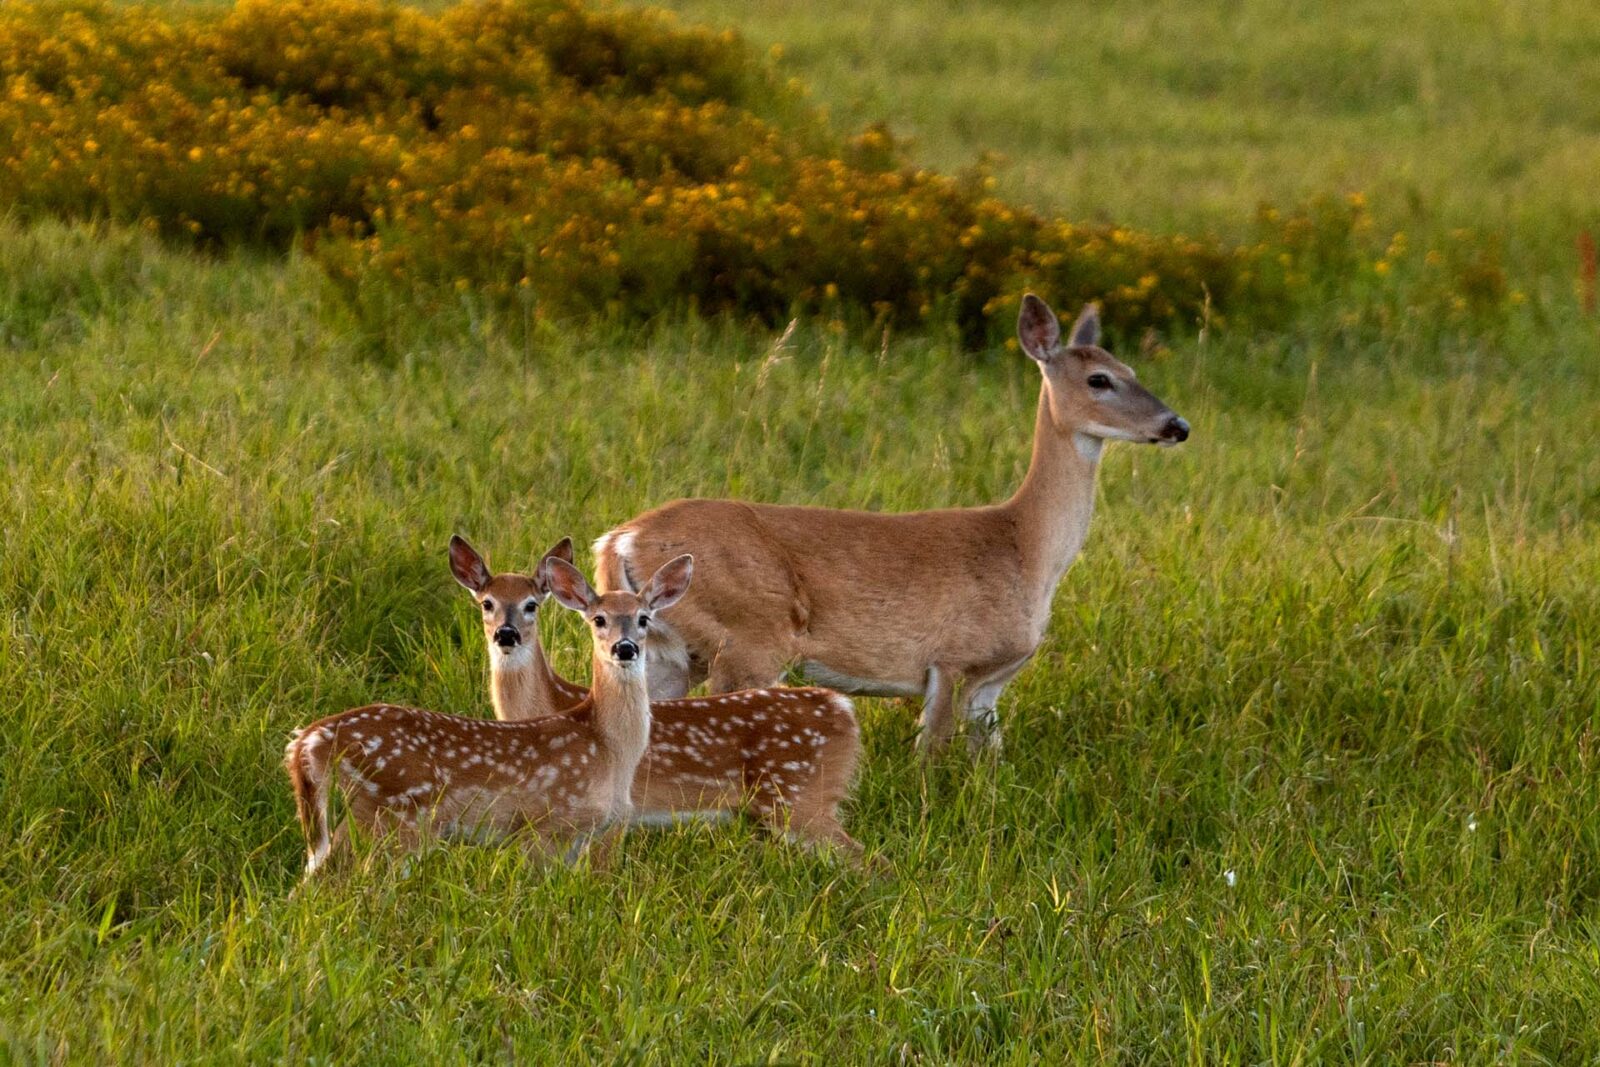 Female deer with two fawns in a grassy field